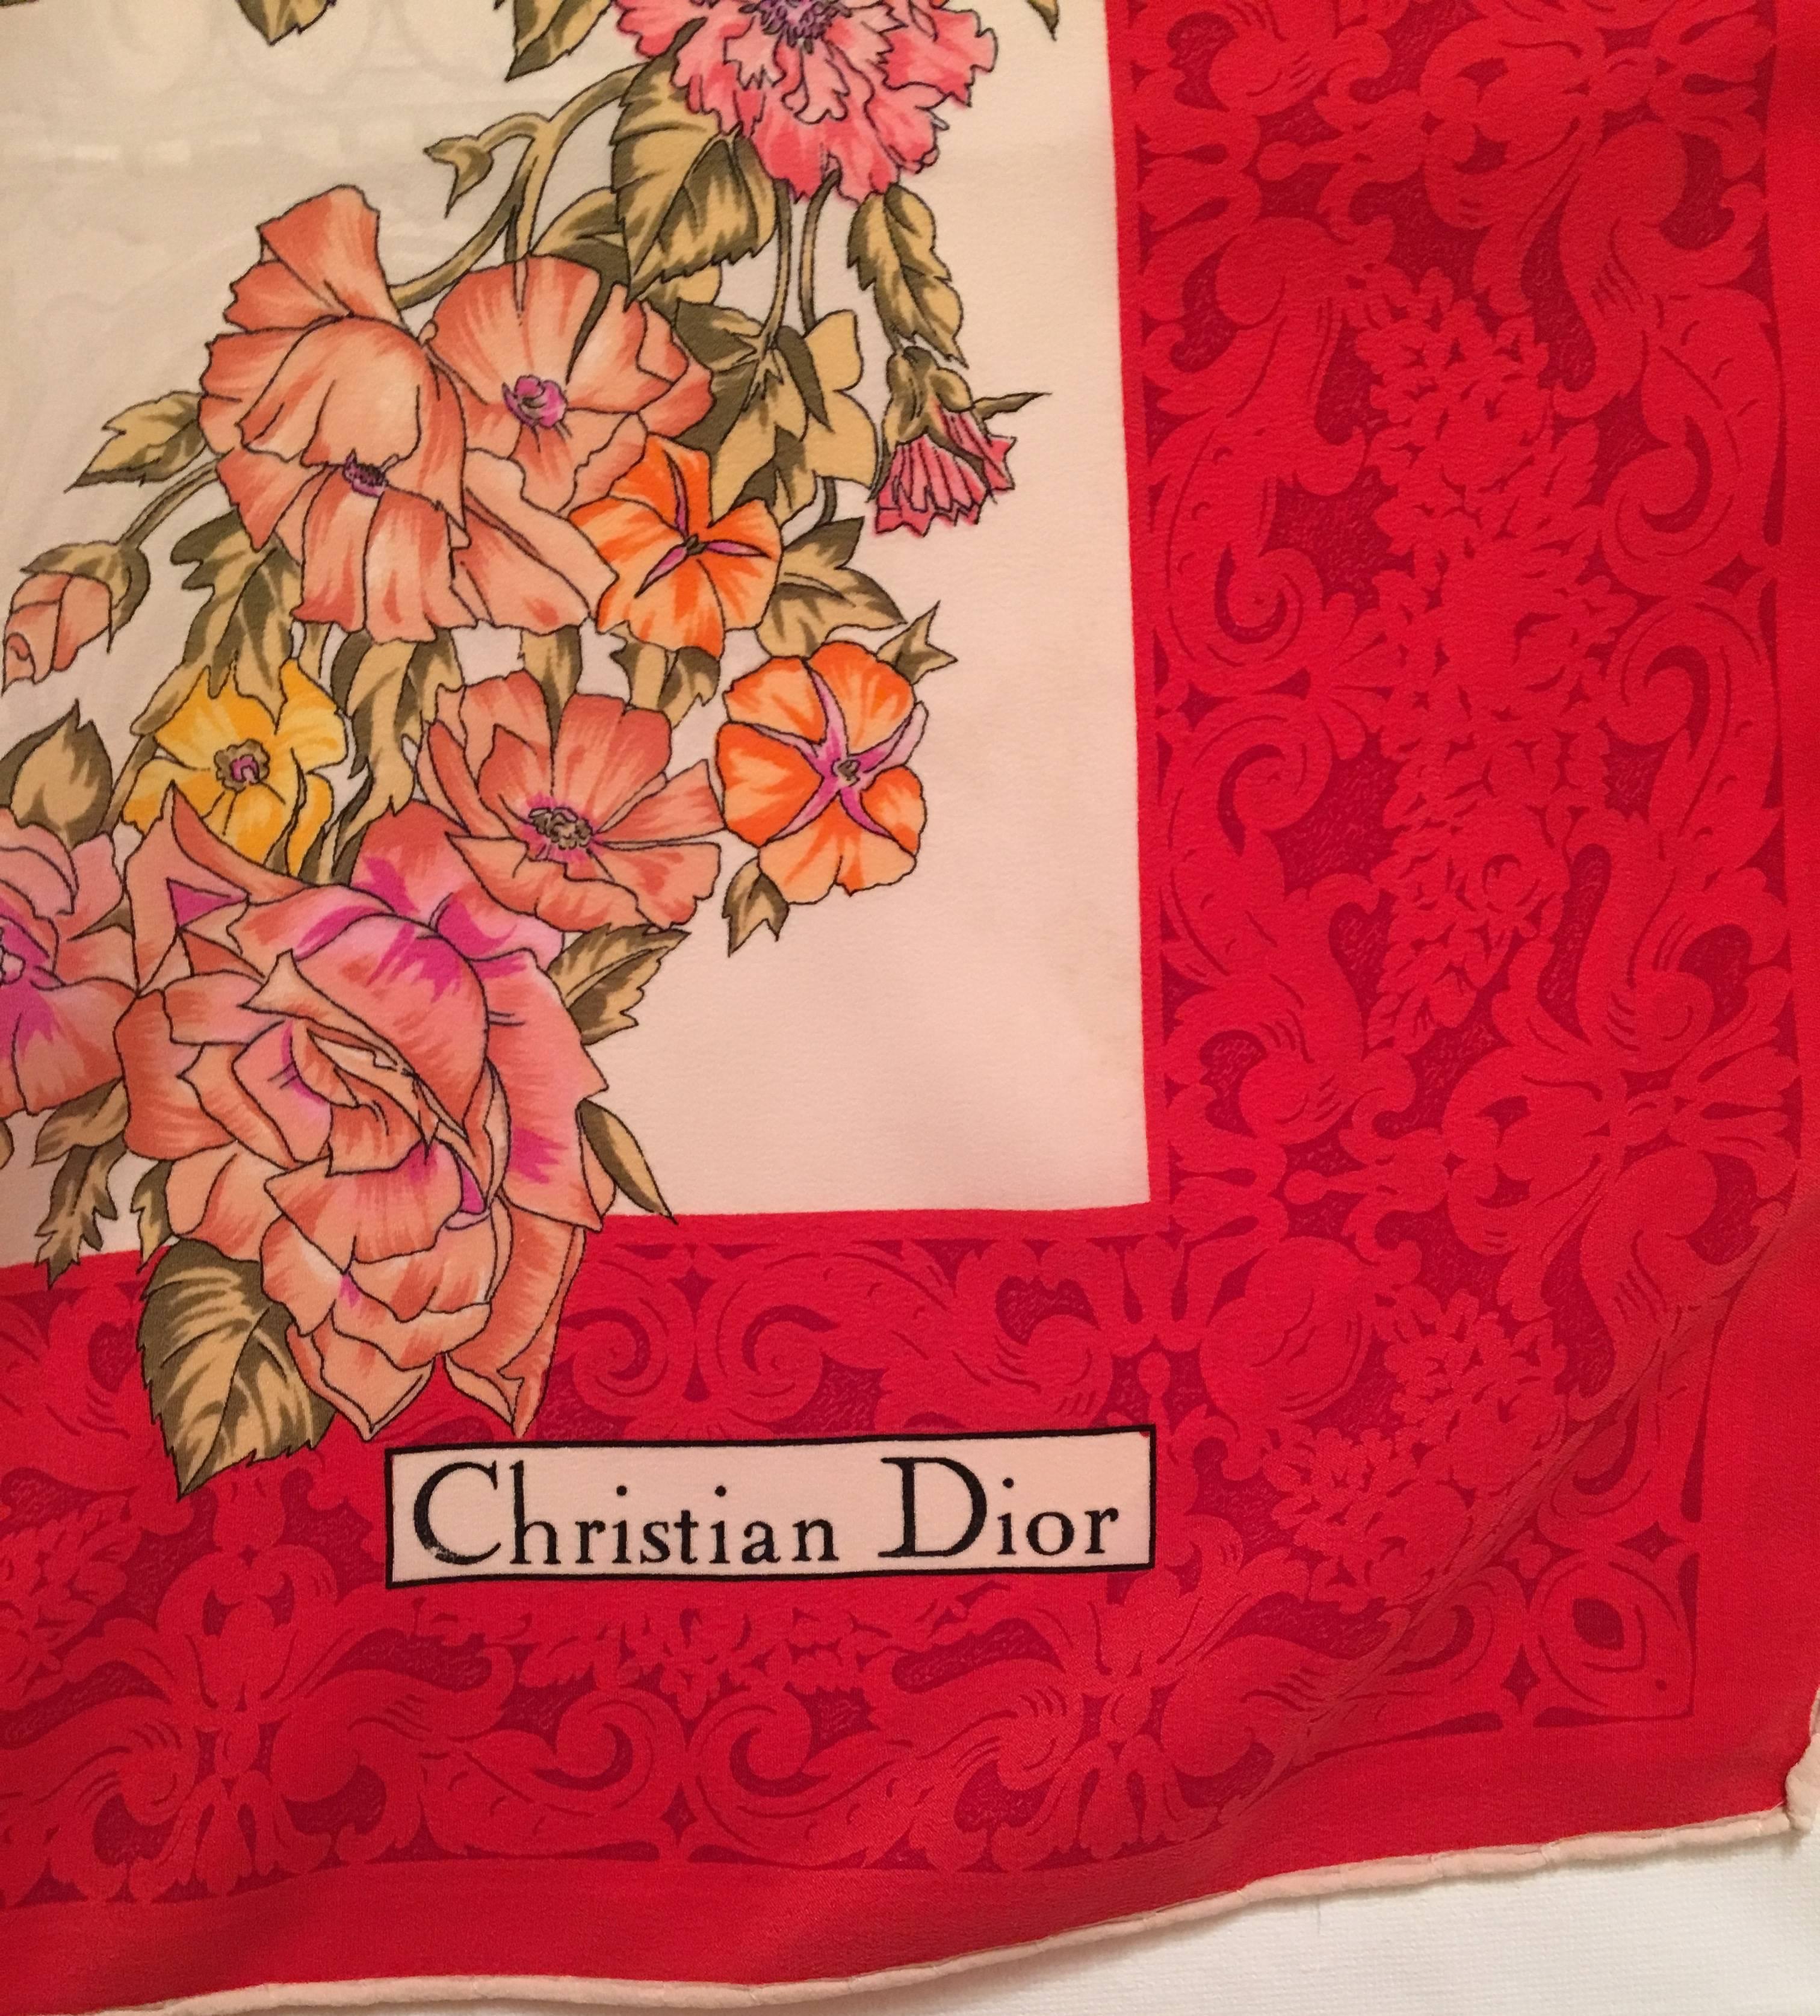 Presented here is a vintage Christian Dior scarf from the 1980's. The scarf has a rich red border with flowers of yellow, orange, peach, red and pink throughout the design of the scarf. Within the red border, there is dark red flowered print that